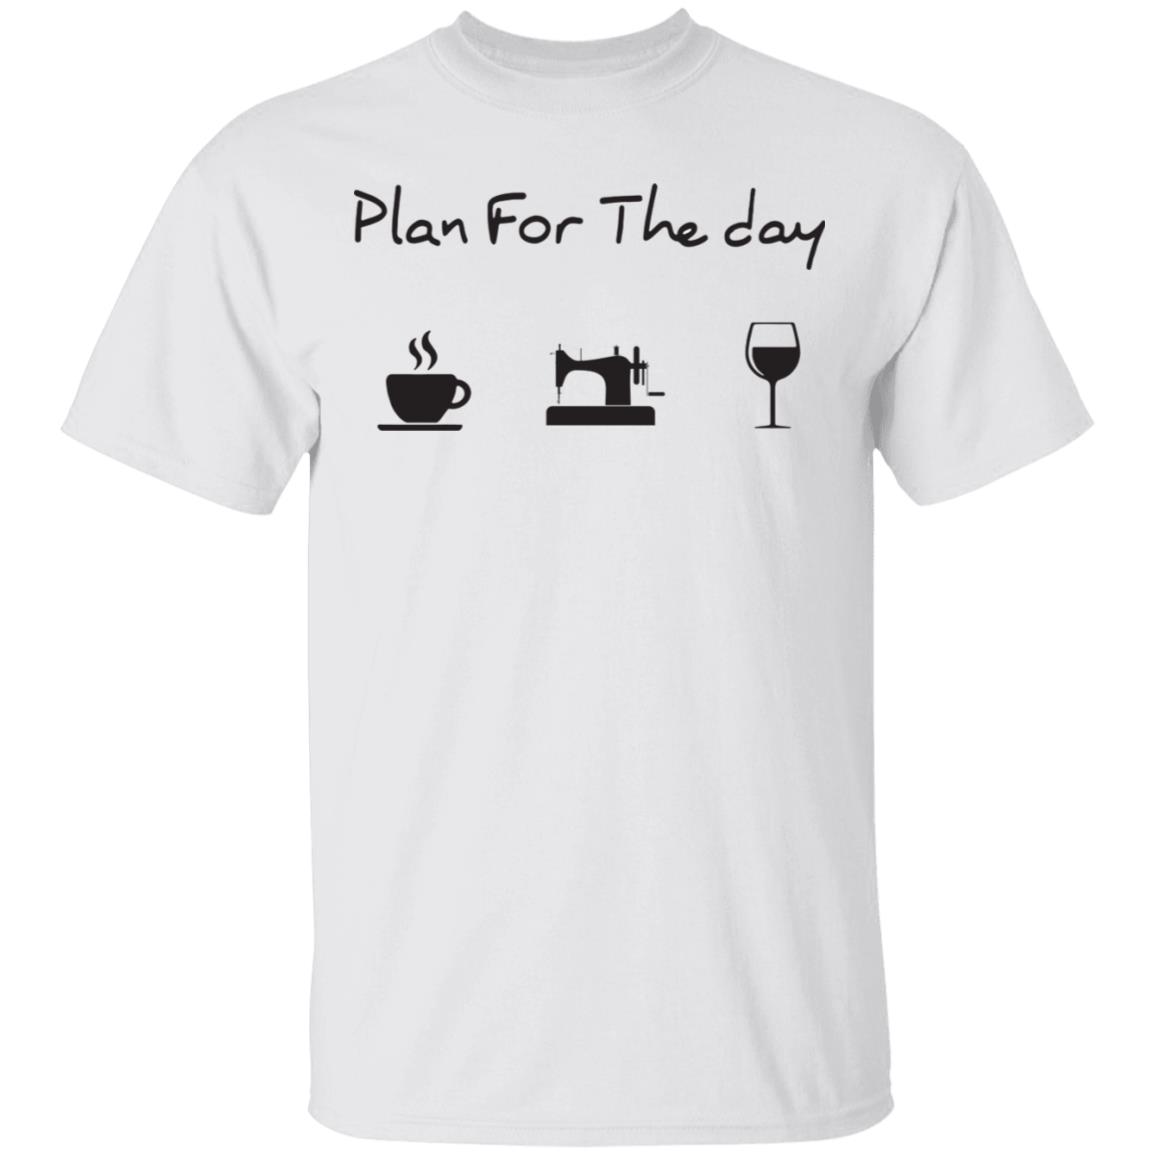 Plan for the day coffee sewing and wine shirt - Rockatee Plan For The Day T Shirt